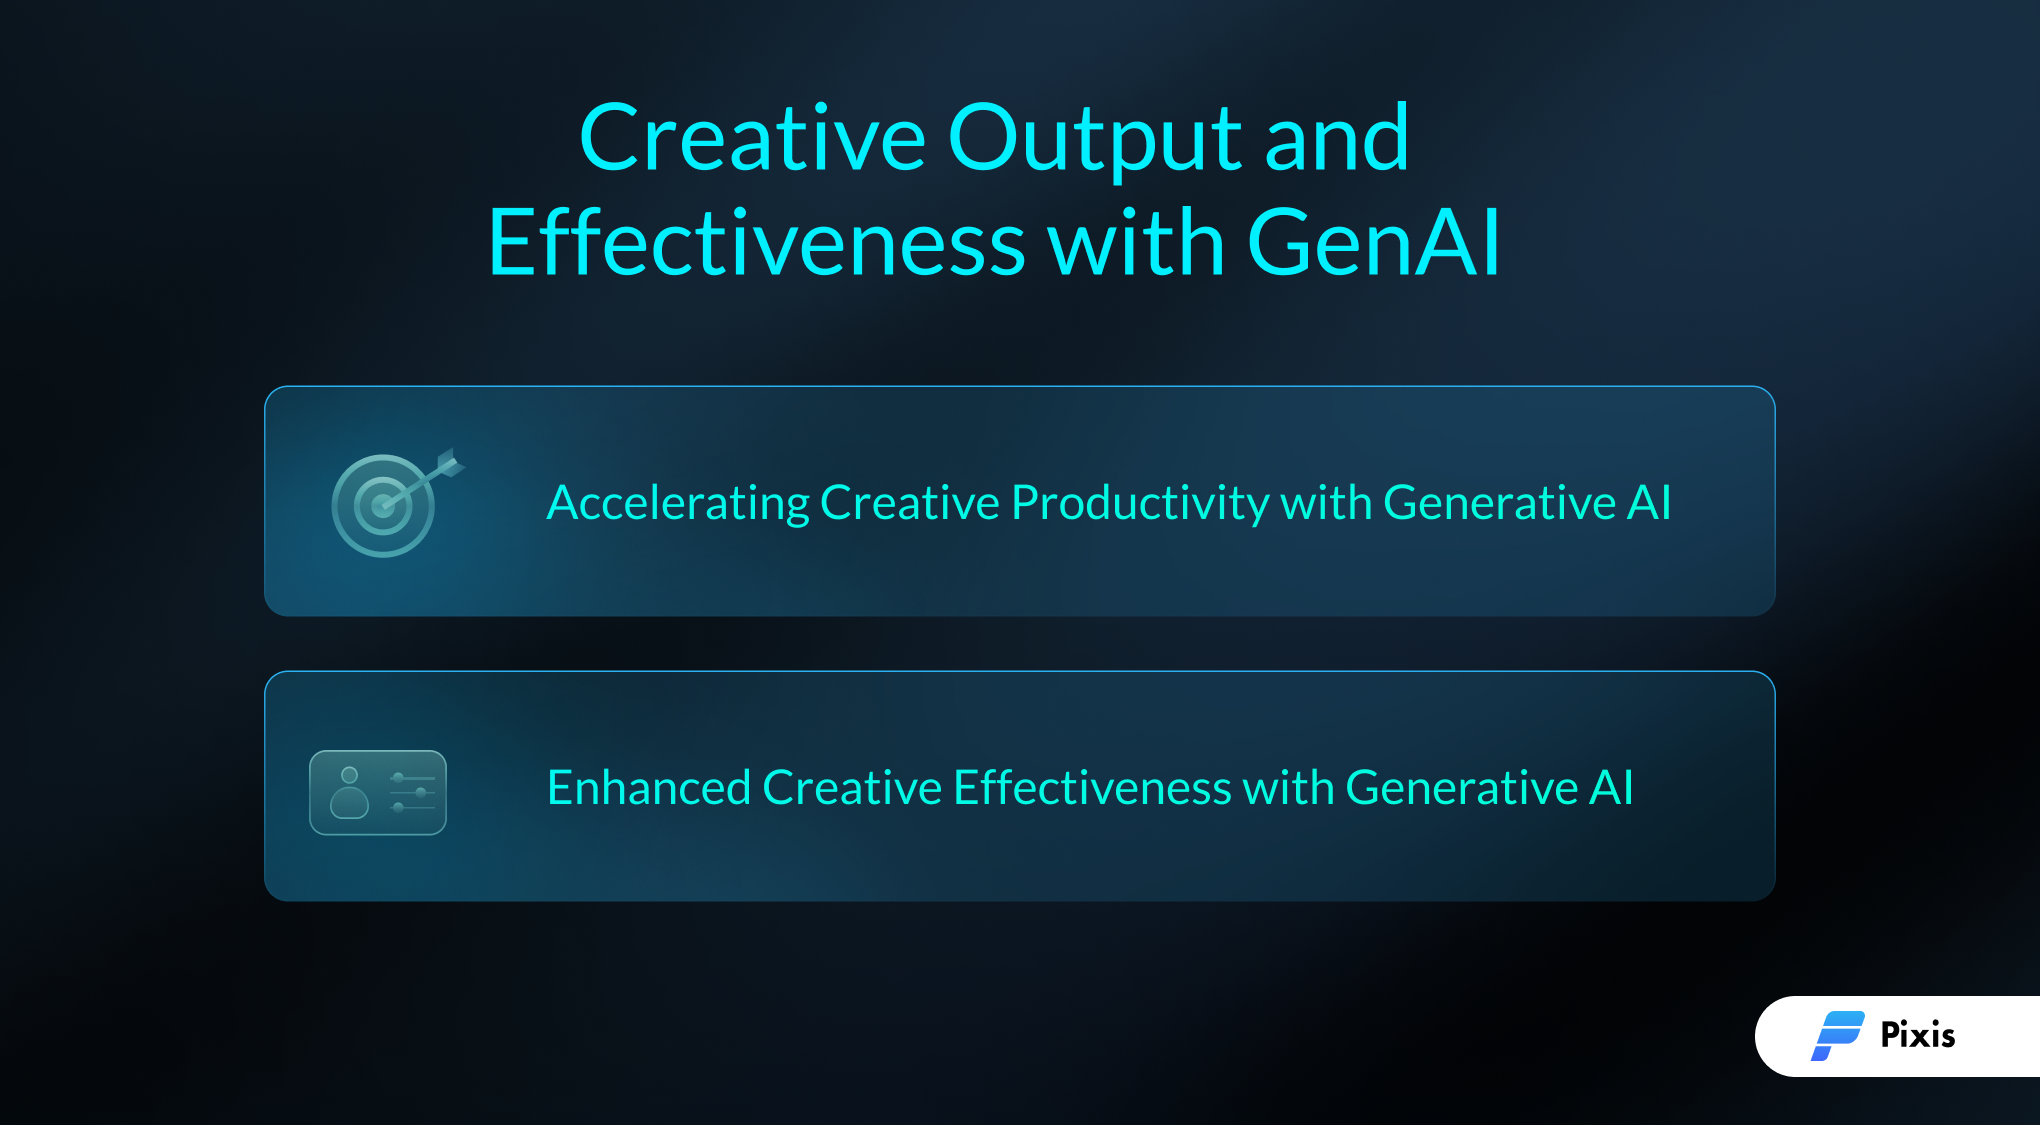 Generative AI can help improve creative output and effectiveness substantially.